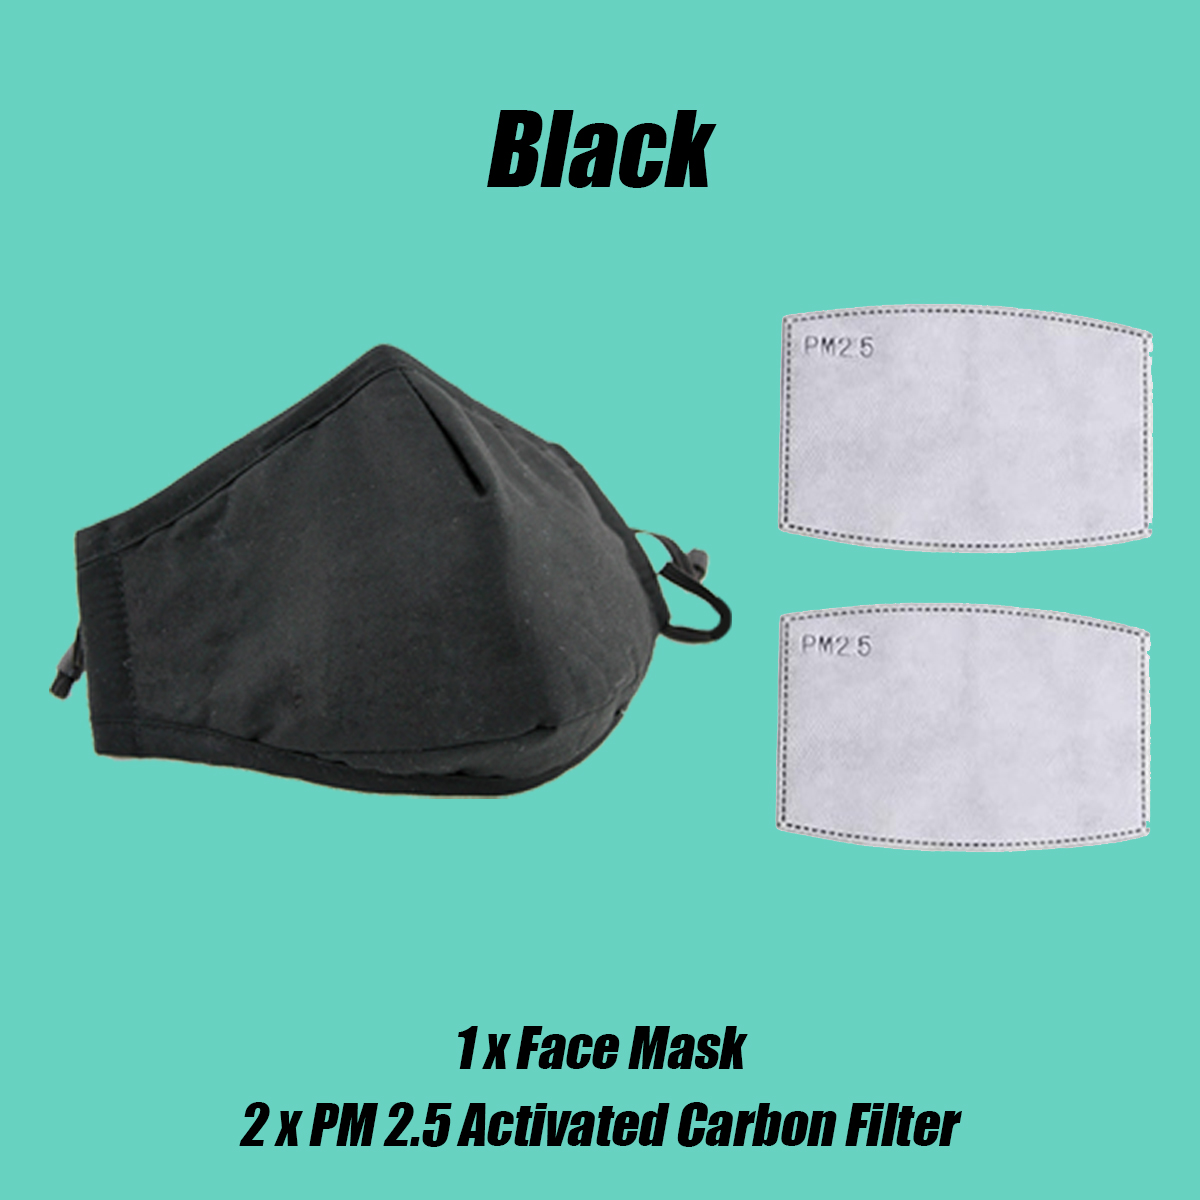 Cotton-Anti-Dust-Face-Mask-Cover-Reusable-PM25-Respirator-with-Filters-Ear-Loop-1662325-7